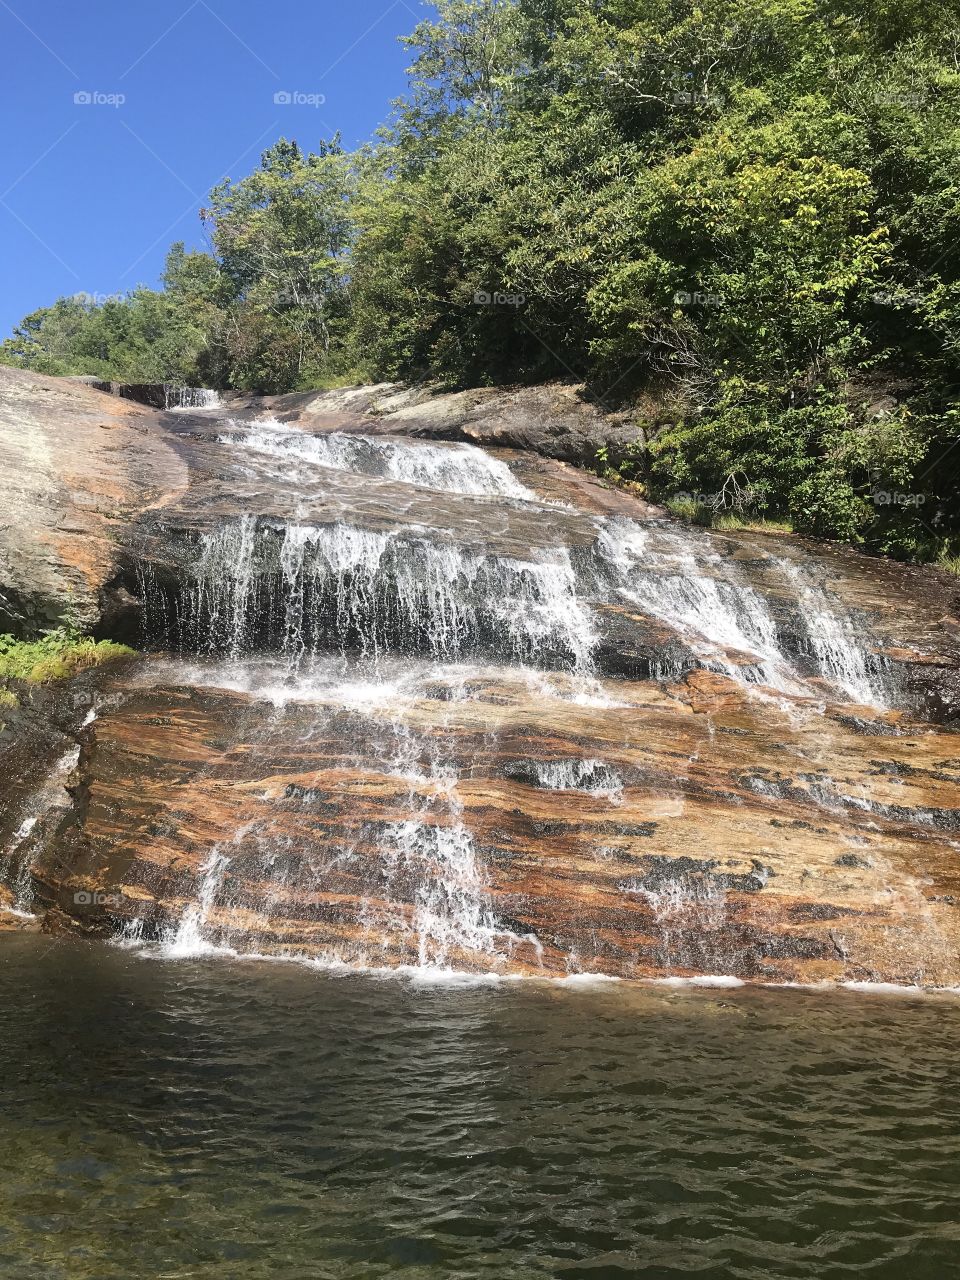 The sedimentary rock seen behind the water of Lower Falls at Graveyard Fields is stunning. The colors pop as the water peacefully cascades down. 